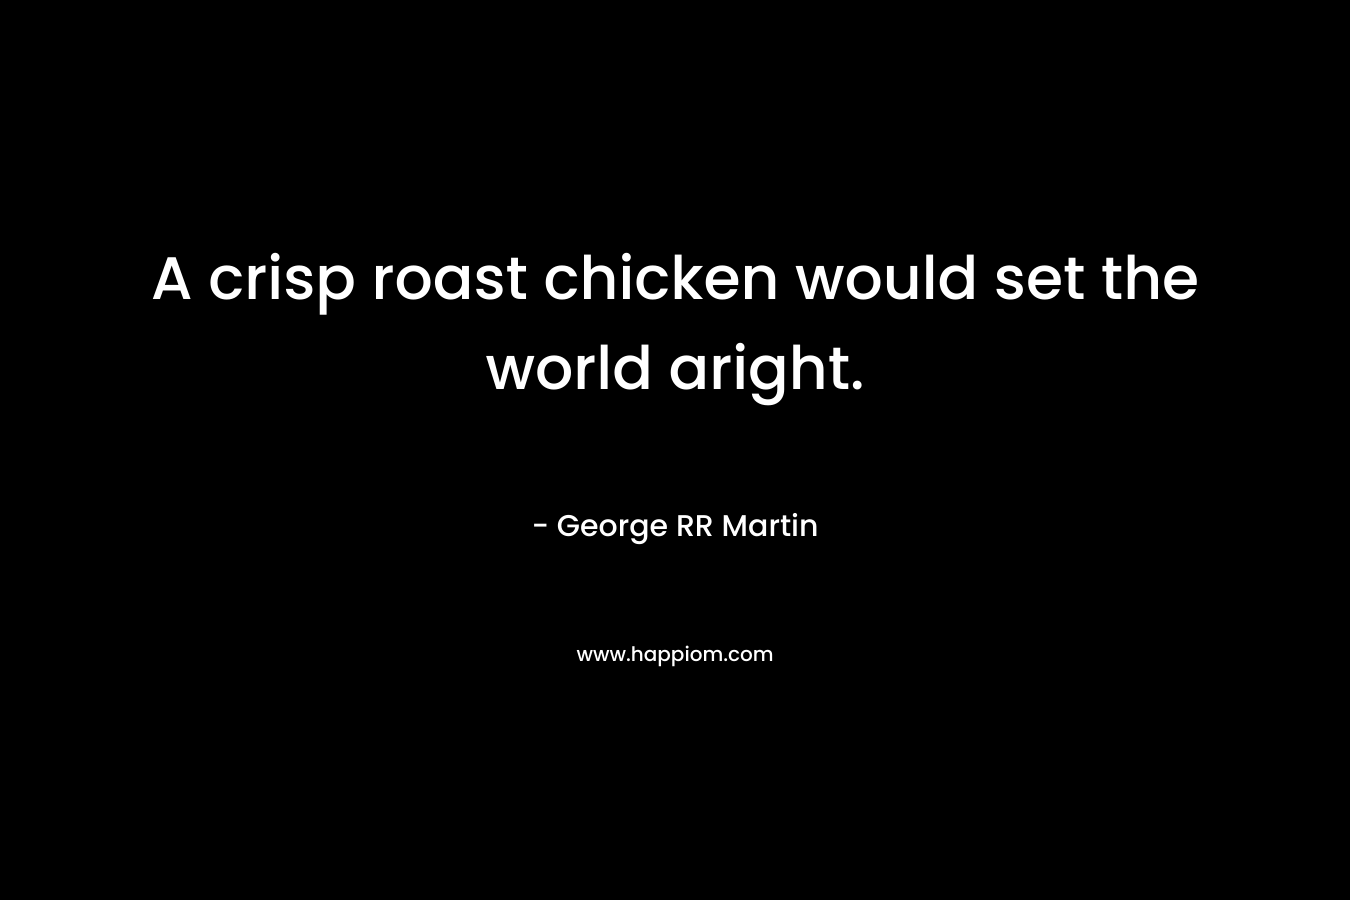 A crisp roast chicken would set the world aright. – George RR Martin